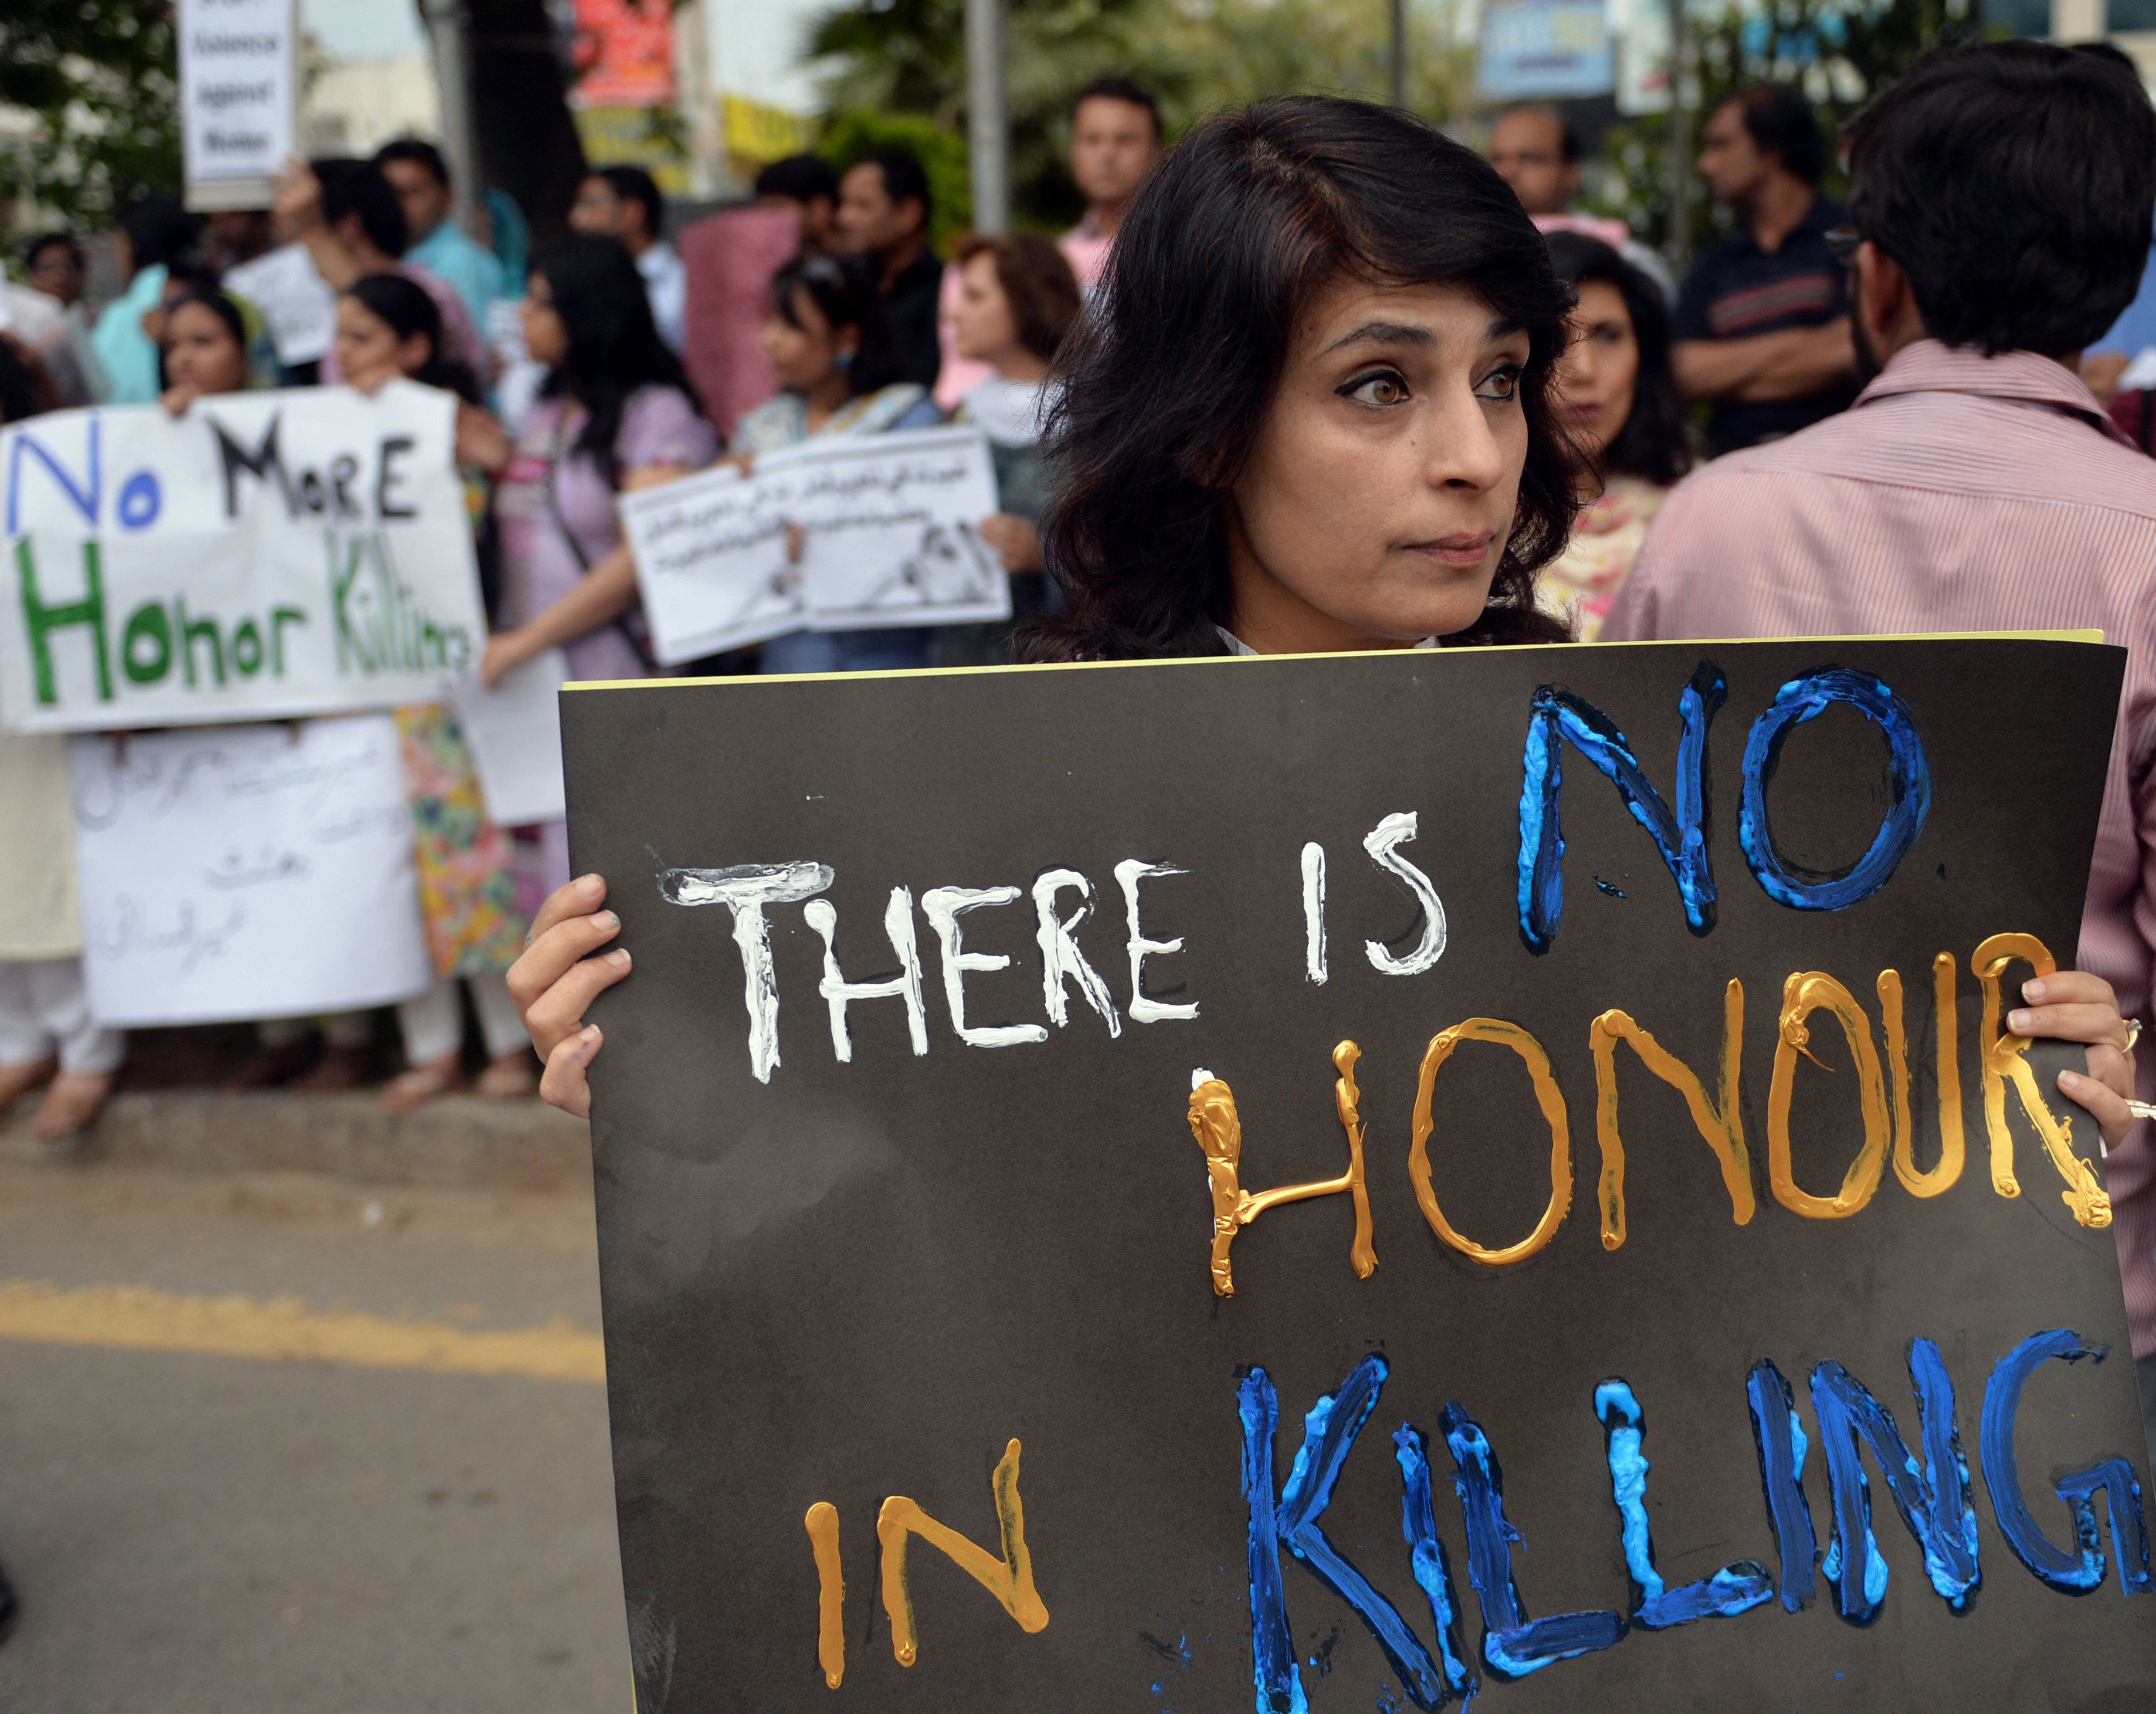 Pakistani human rights activists at a 2014 rally against honour killing. Around 1,000 women in Pakistan are killed yearly by relatives on the pretext of preserving the family’s honour. Photo: AFP